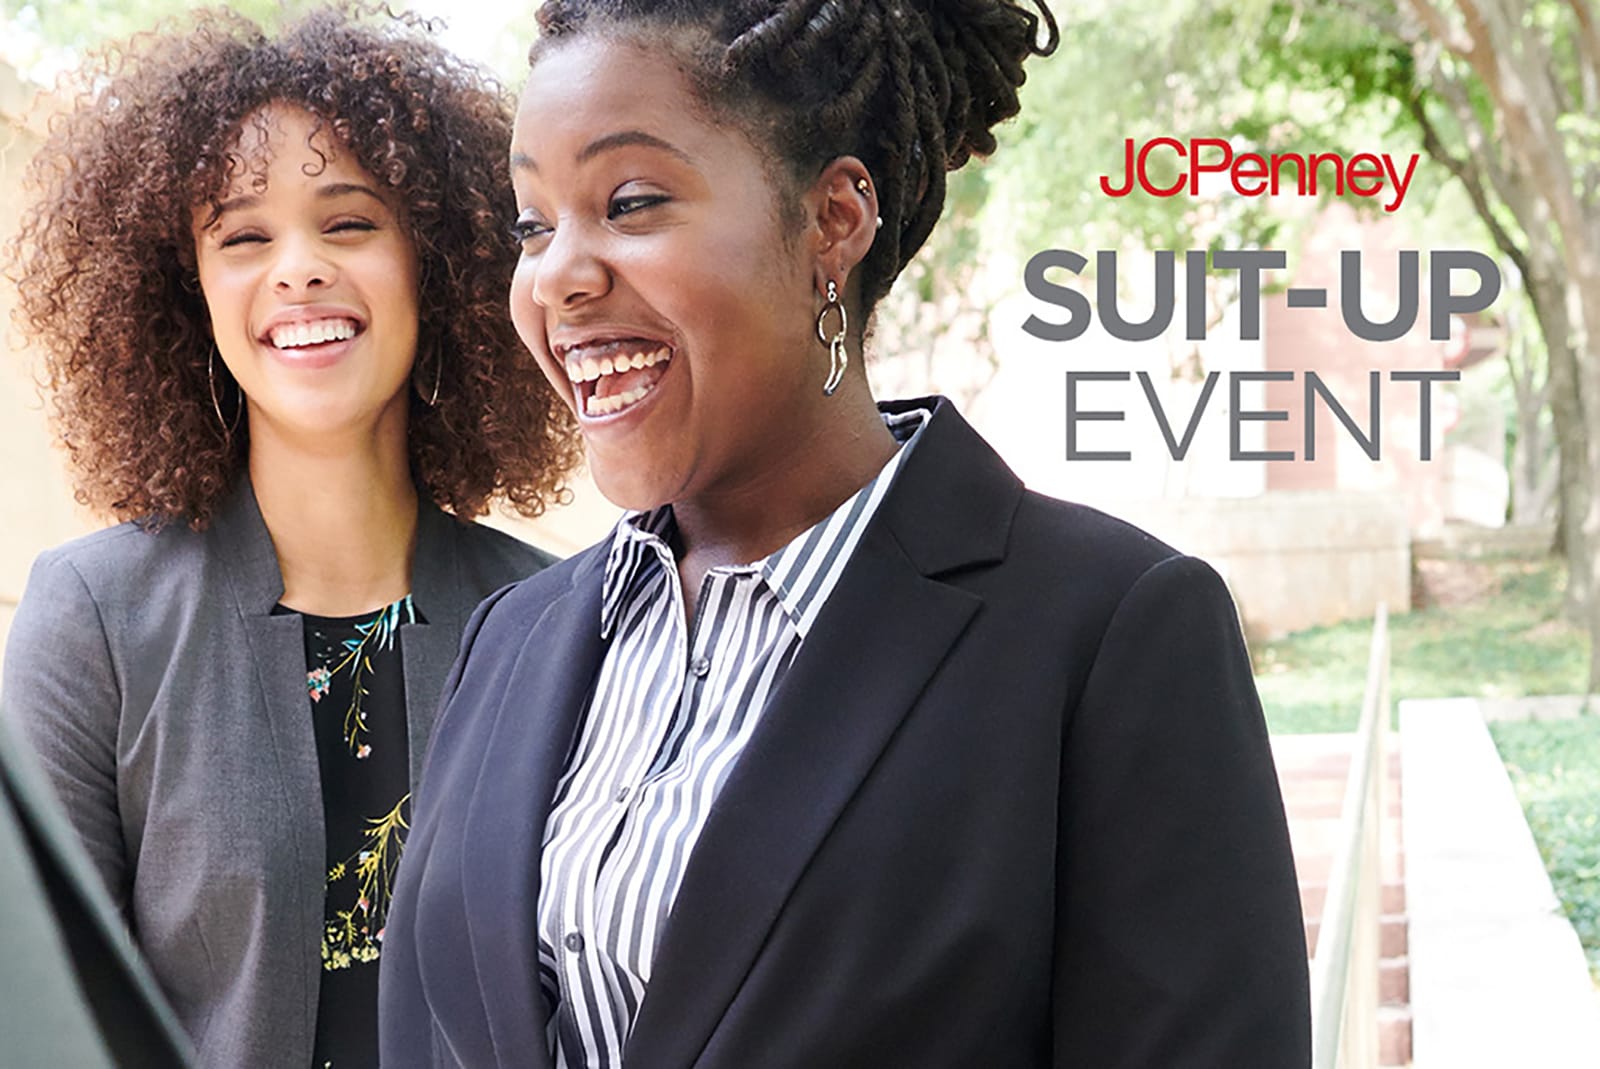 Dress for Success With SUNY Niagara and JCPenney